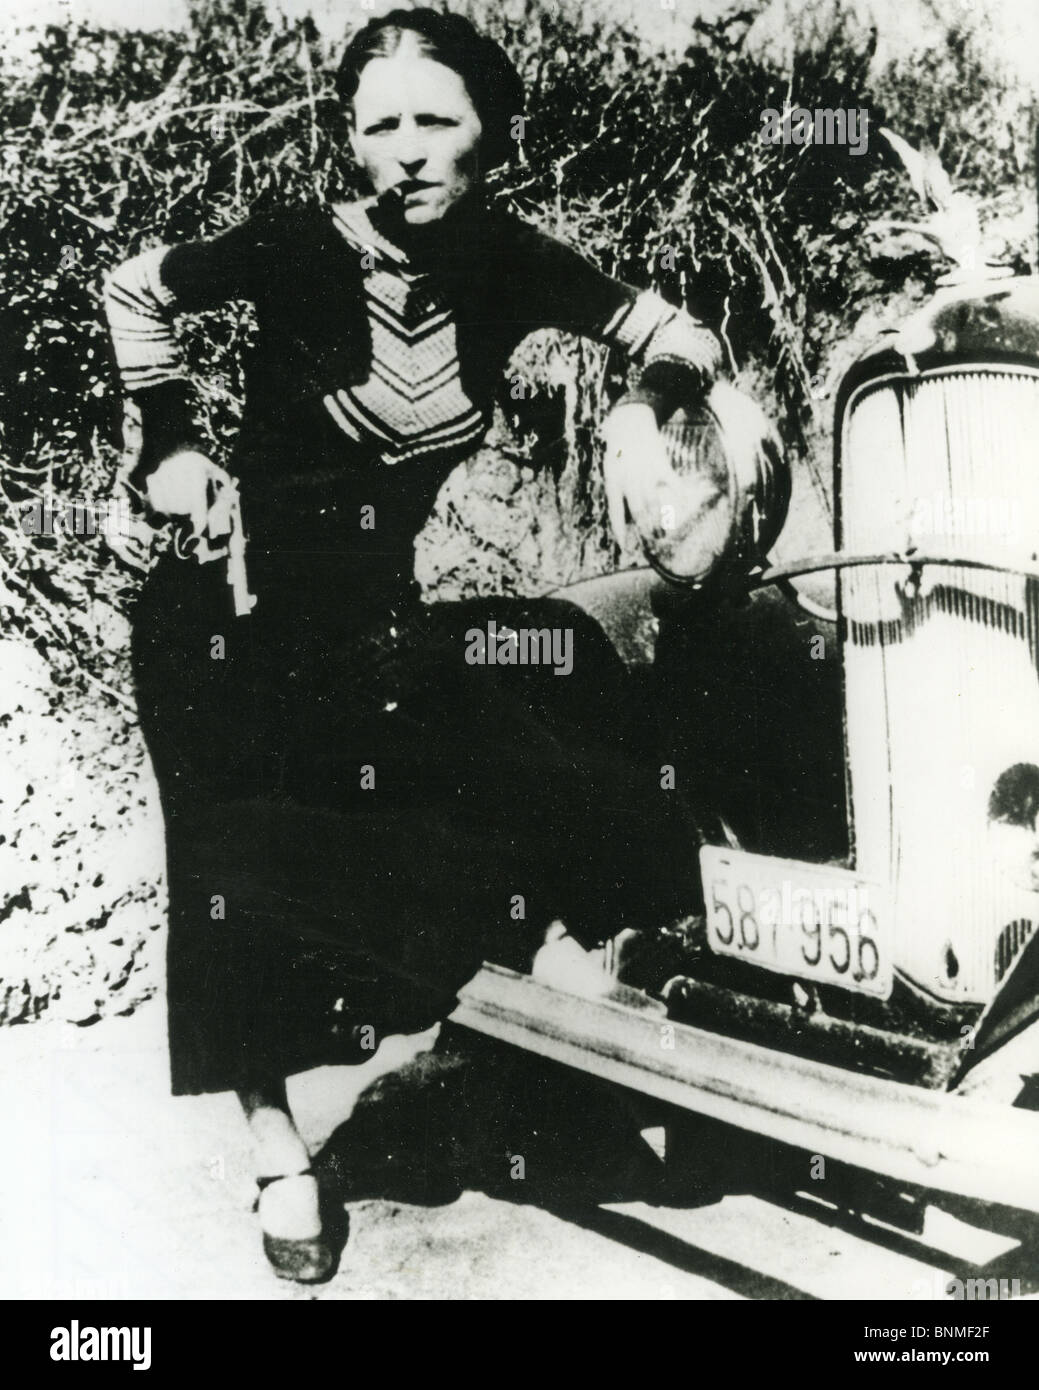 BONNIE PARKER  (1910-34) criminal companion of Clyde Barrow in 1933 when he took this photo Stock Photo